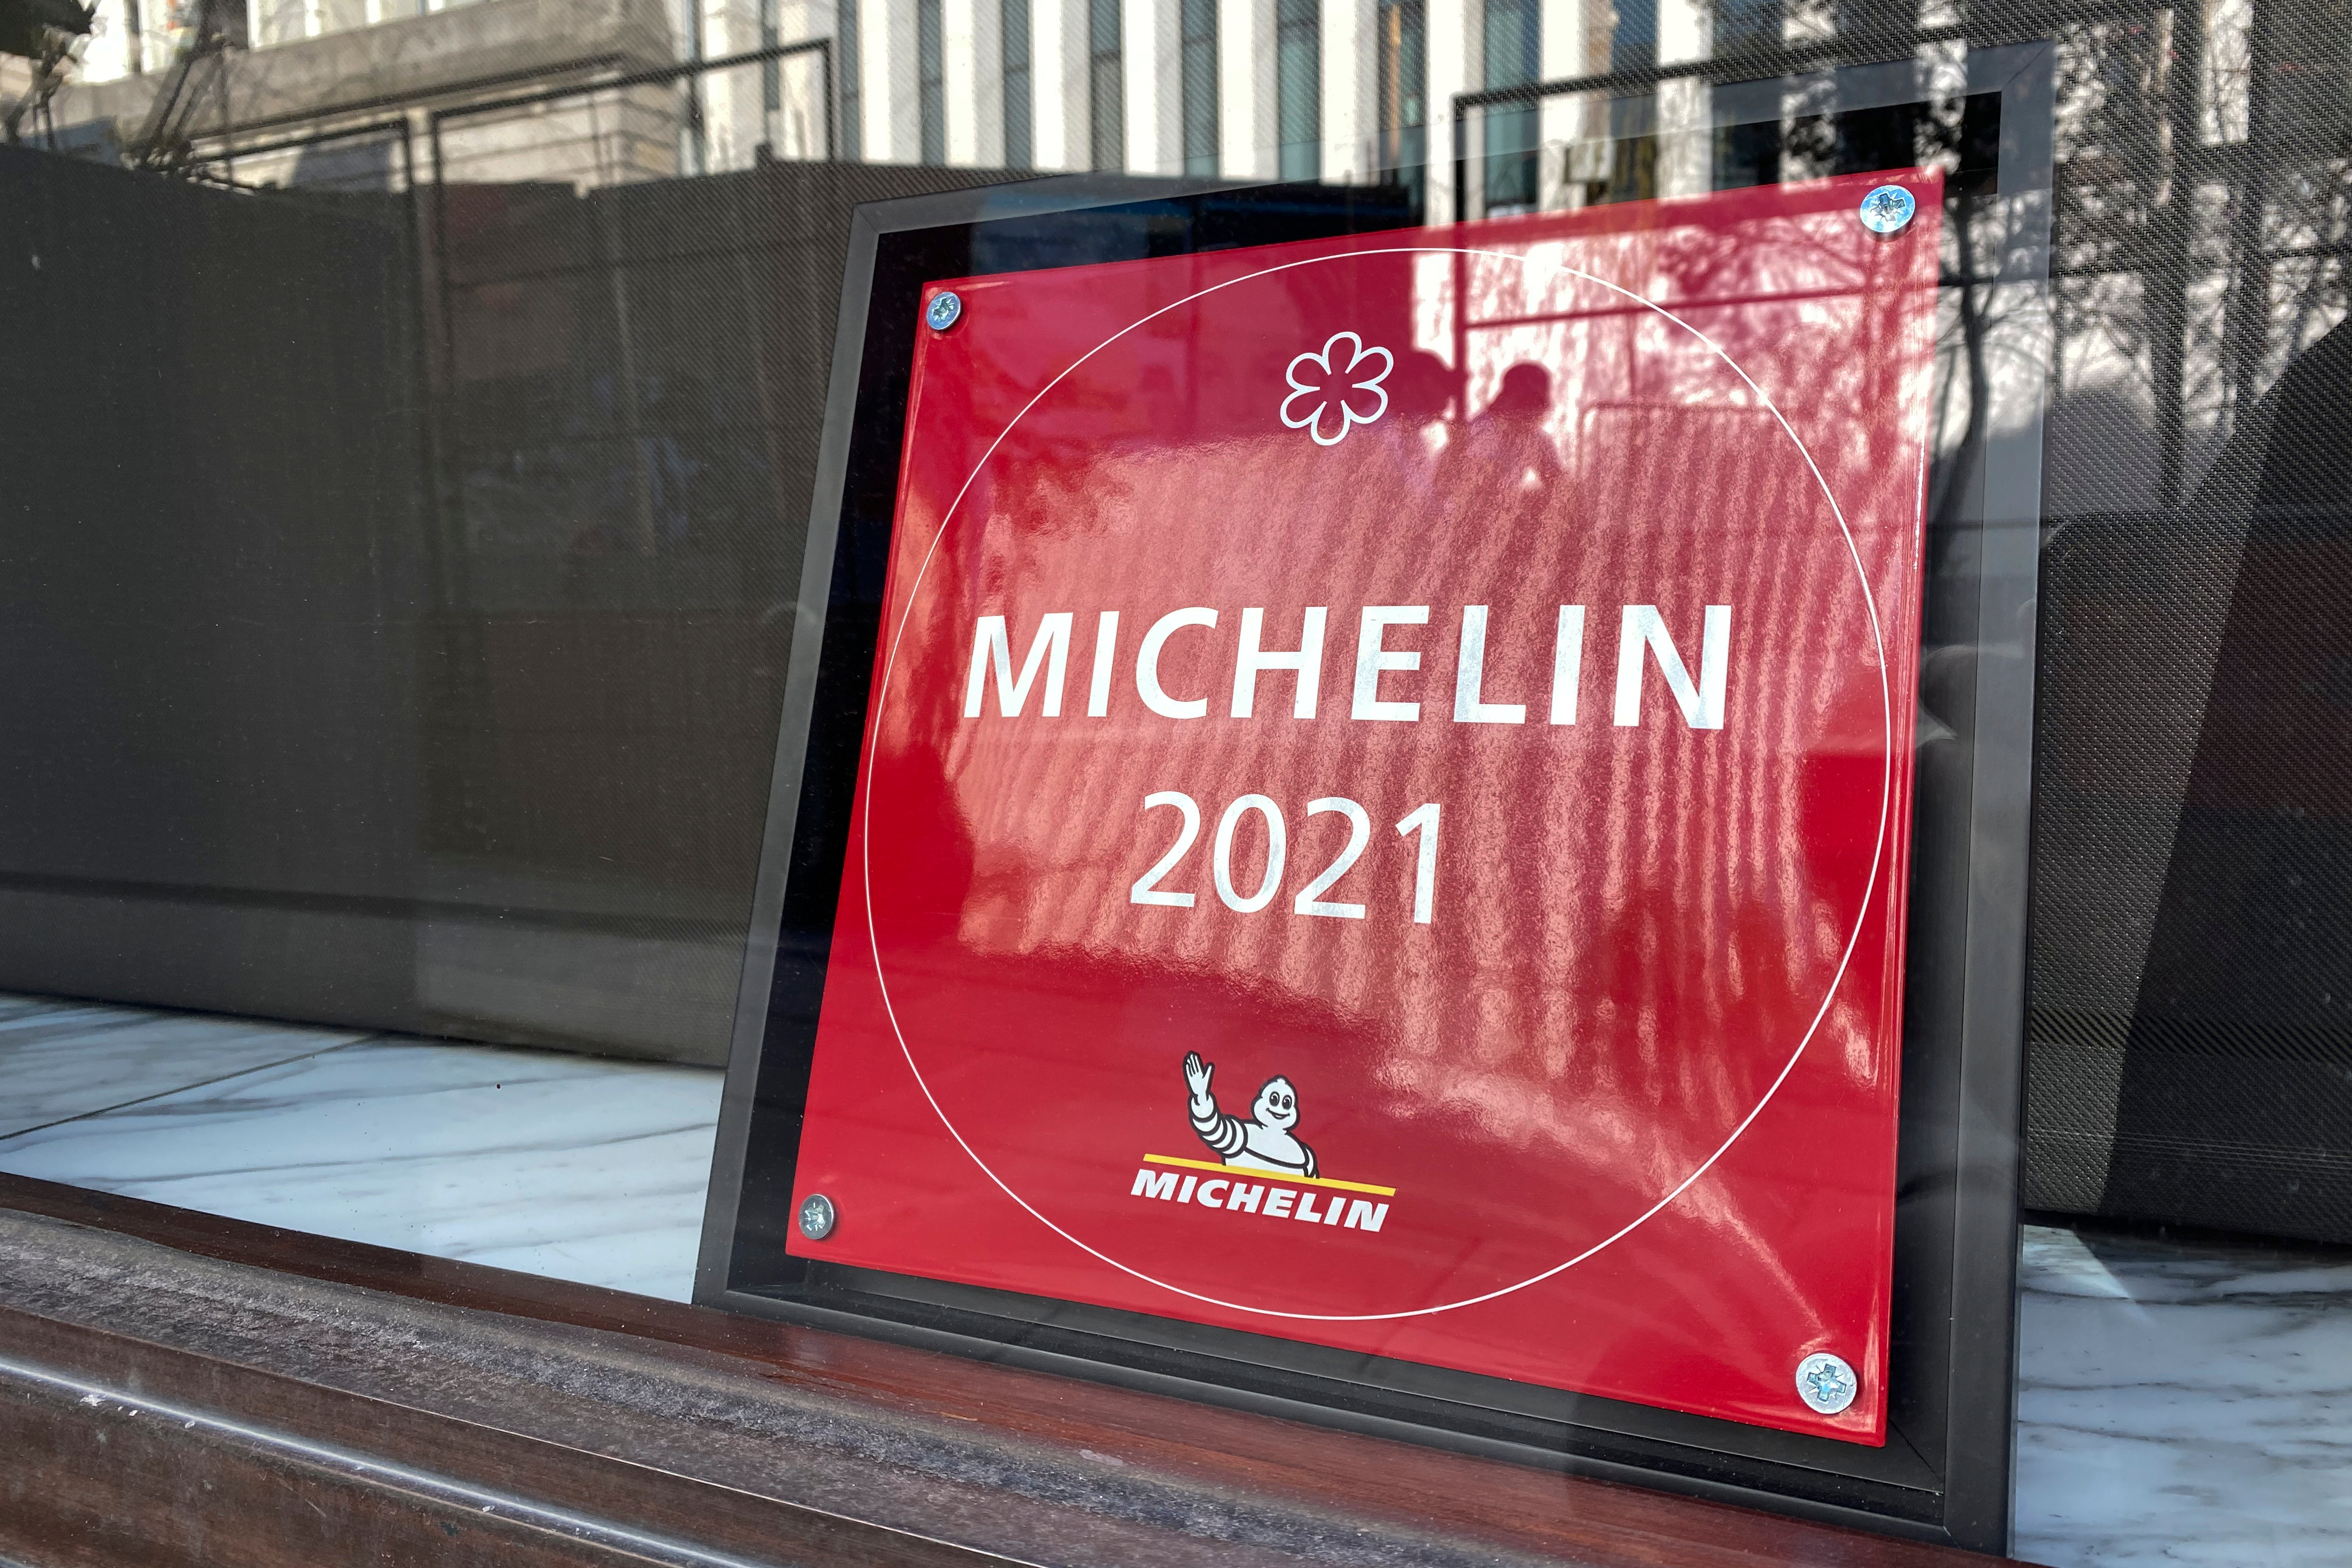 A Michelin 2021 sign sits behind a shop window